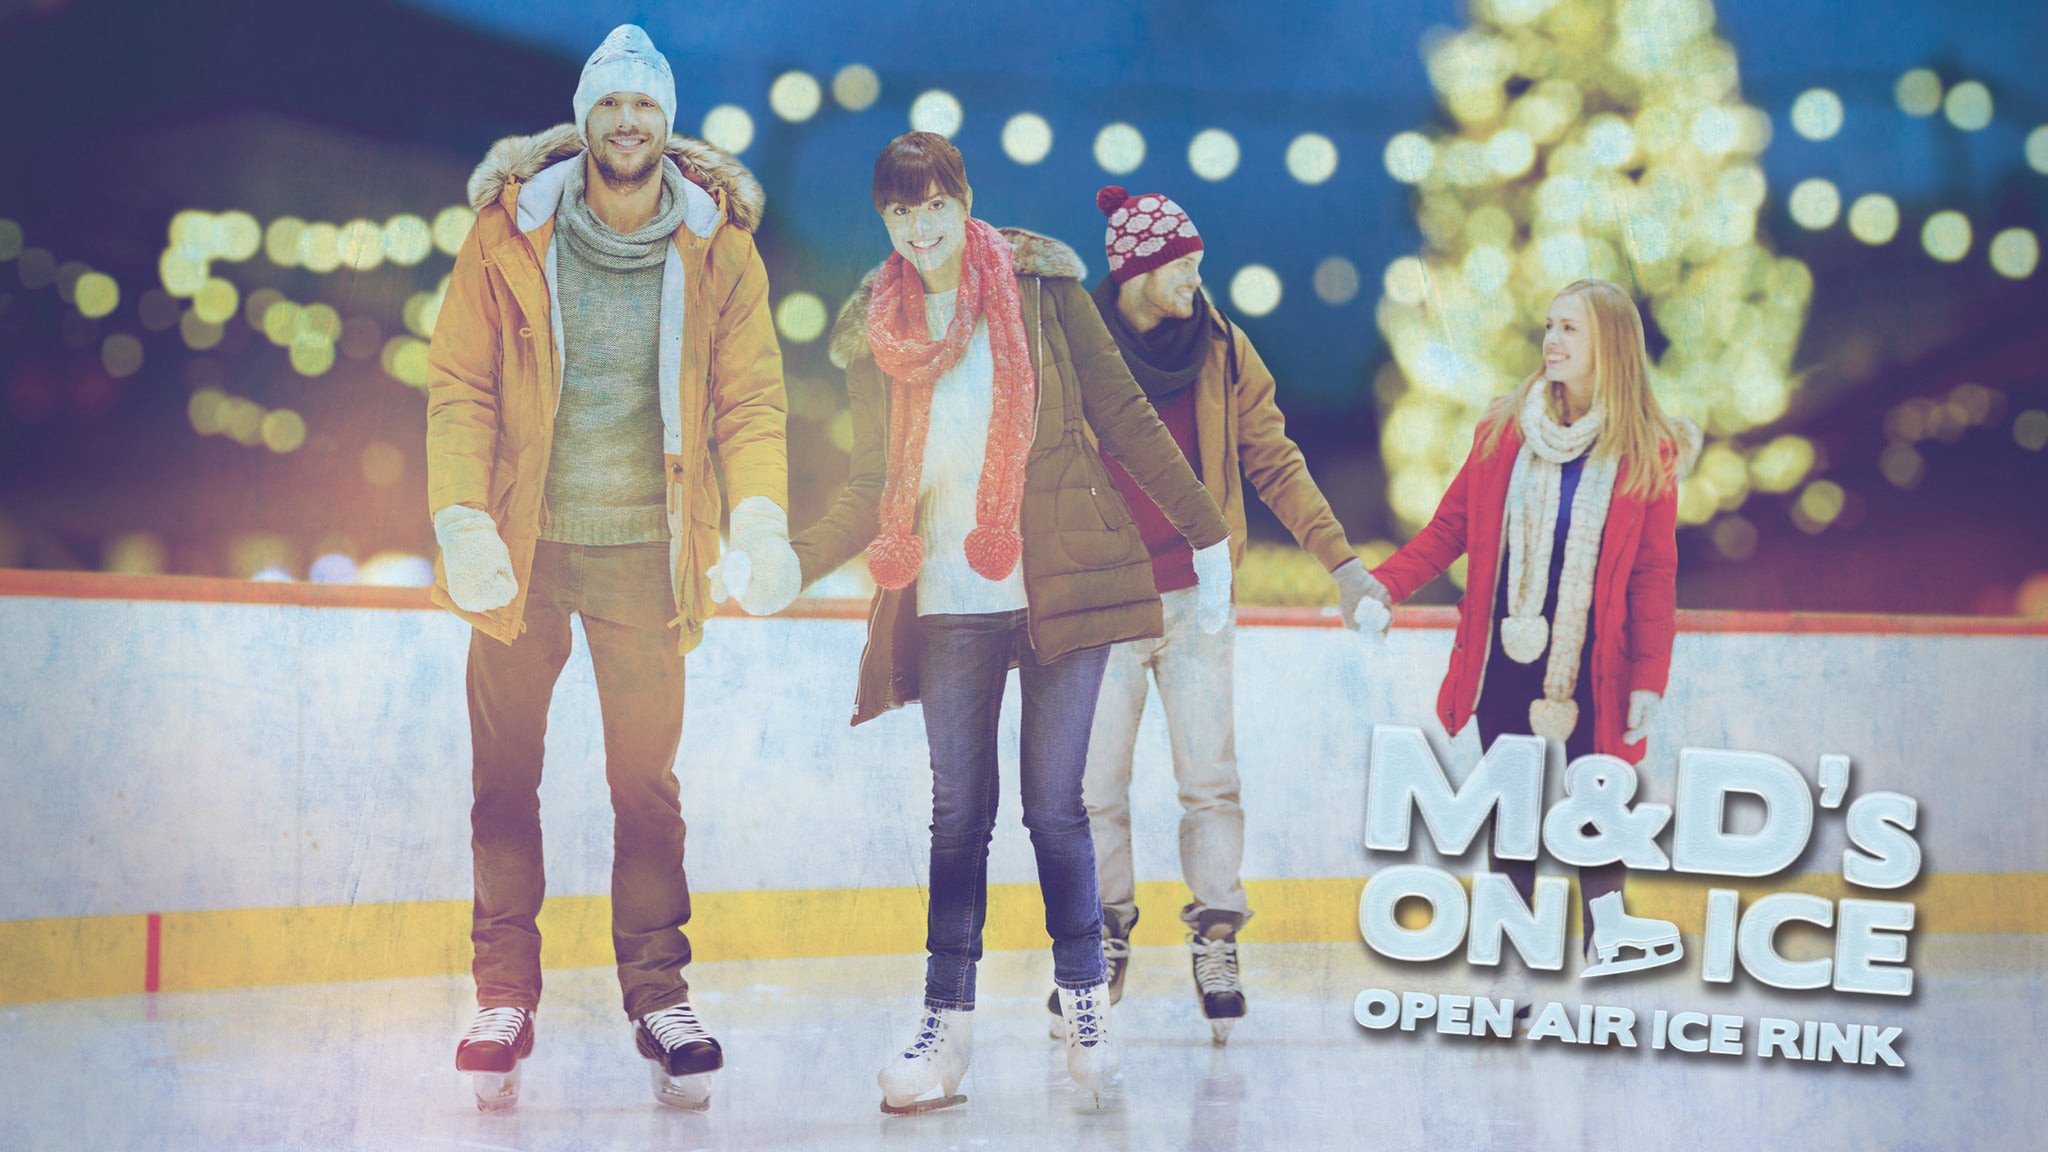 M&D's on Ice Event Title Pic